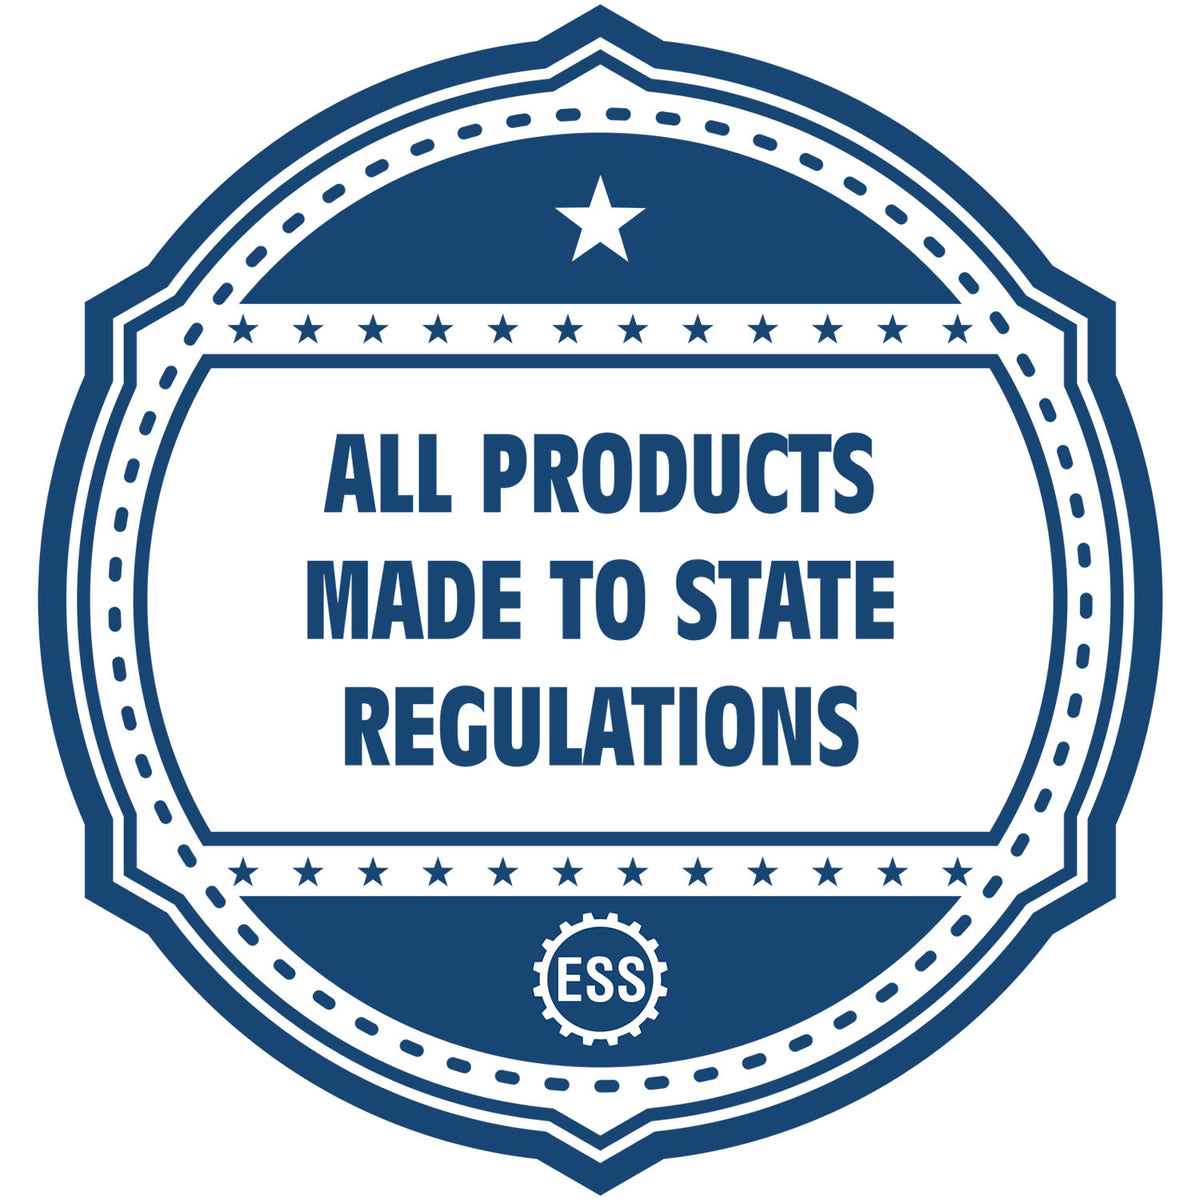 A blue icon or badge for the Slim Pre-Inked Arizona Professional Geologist Seal Stamp showing that this product is made in compliance with state regulations.